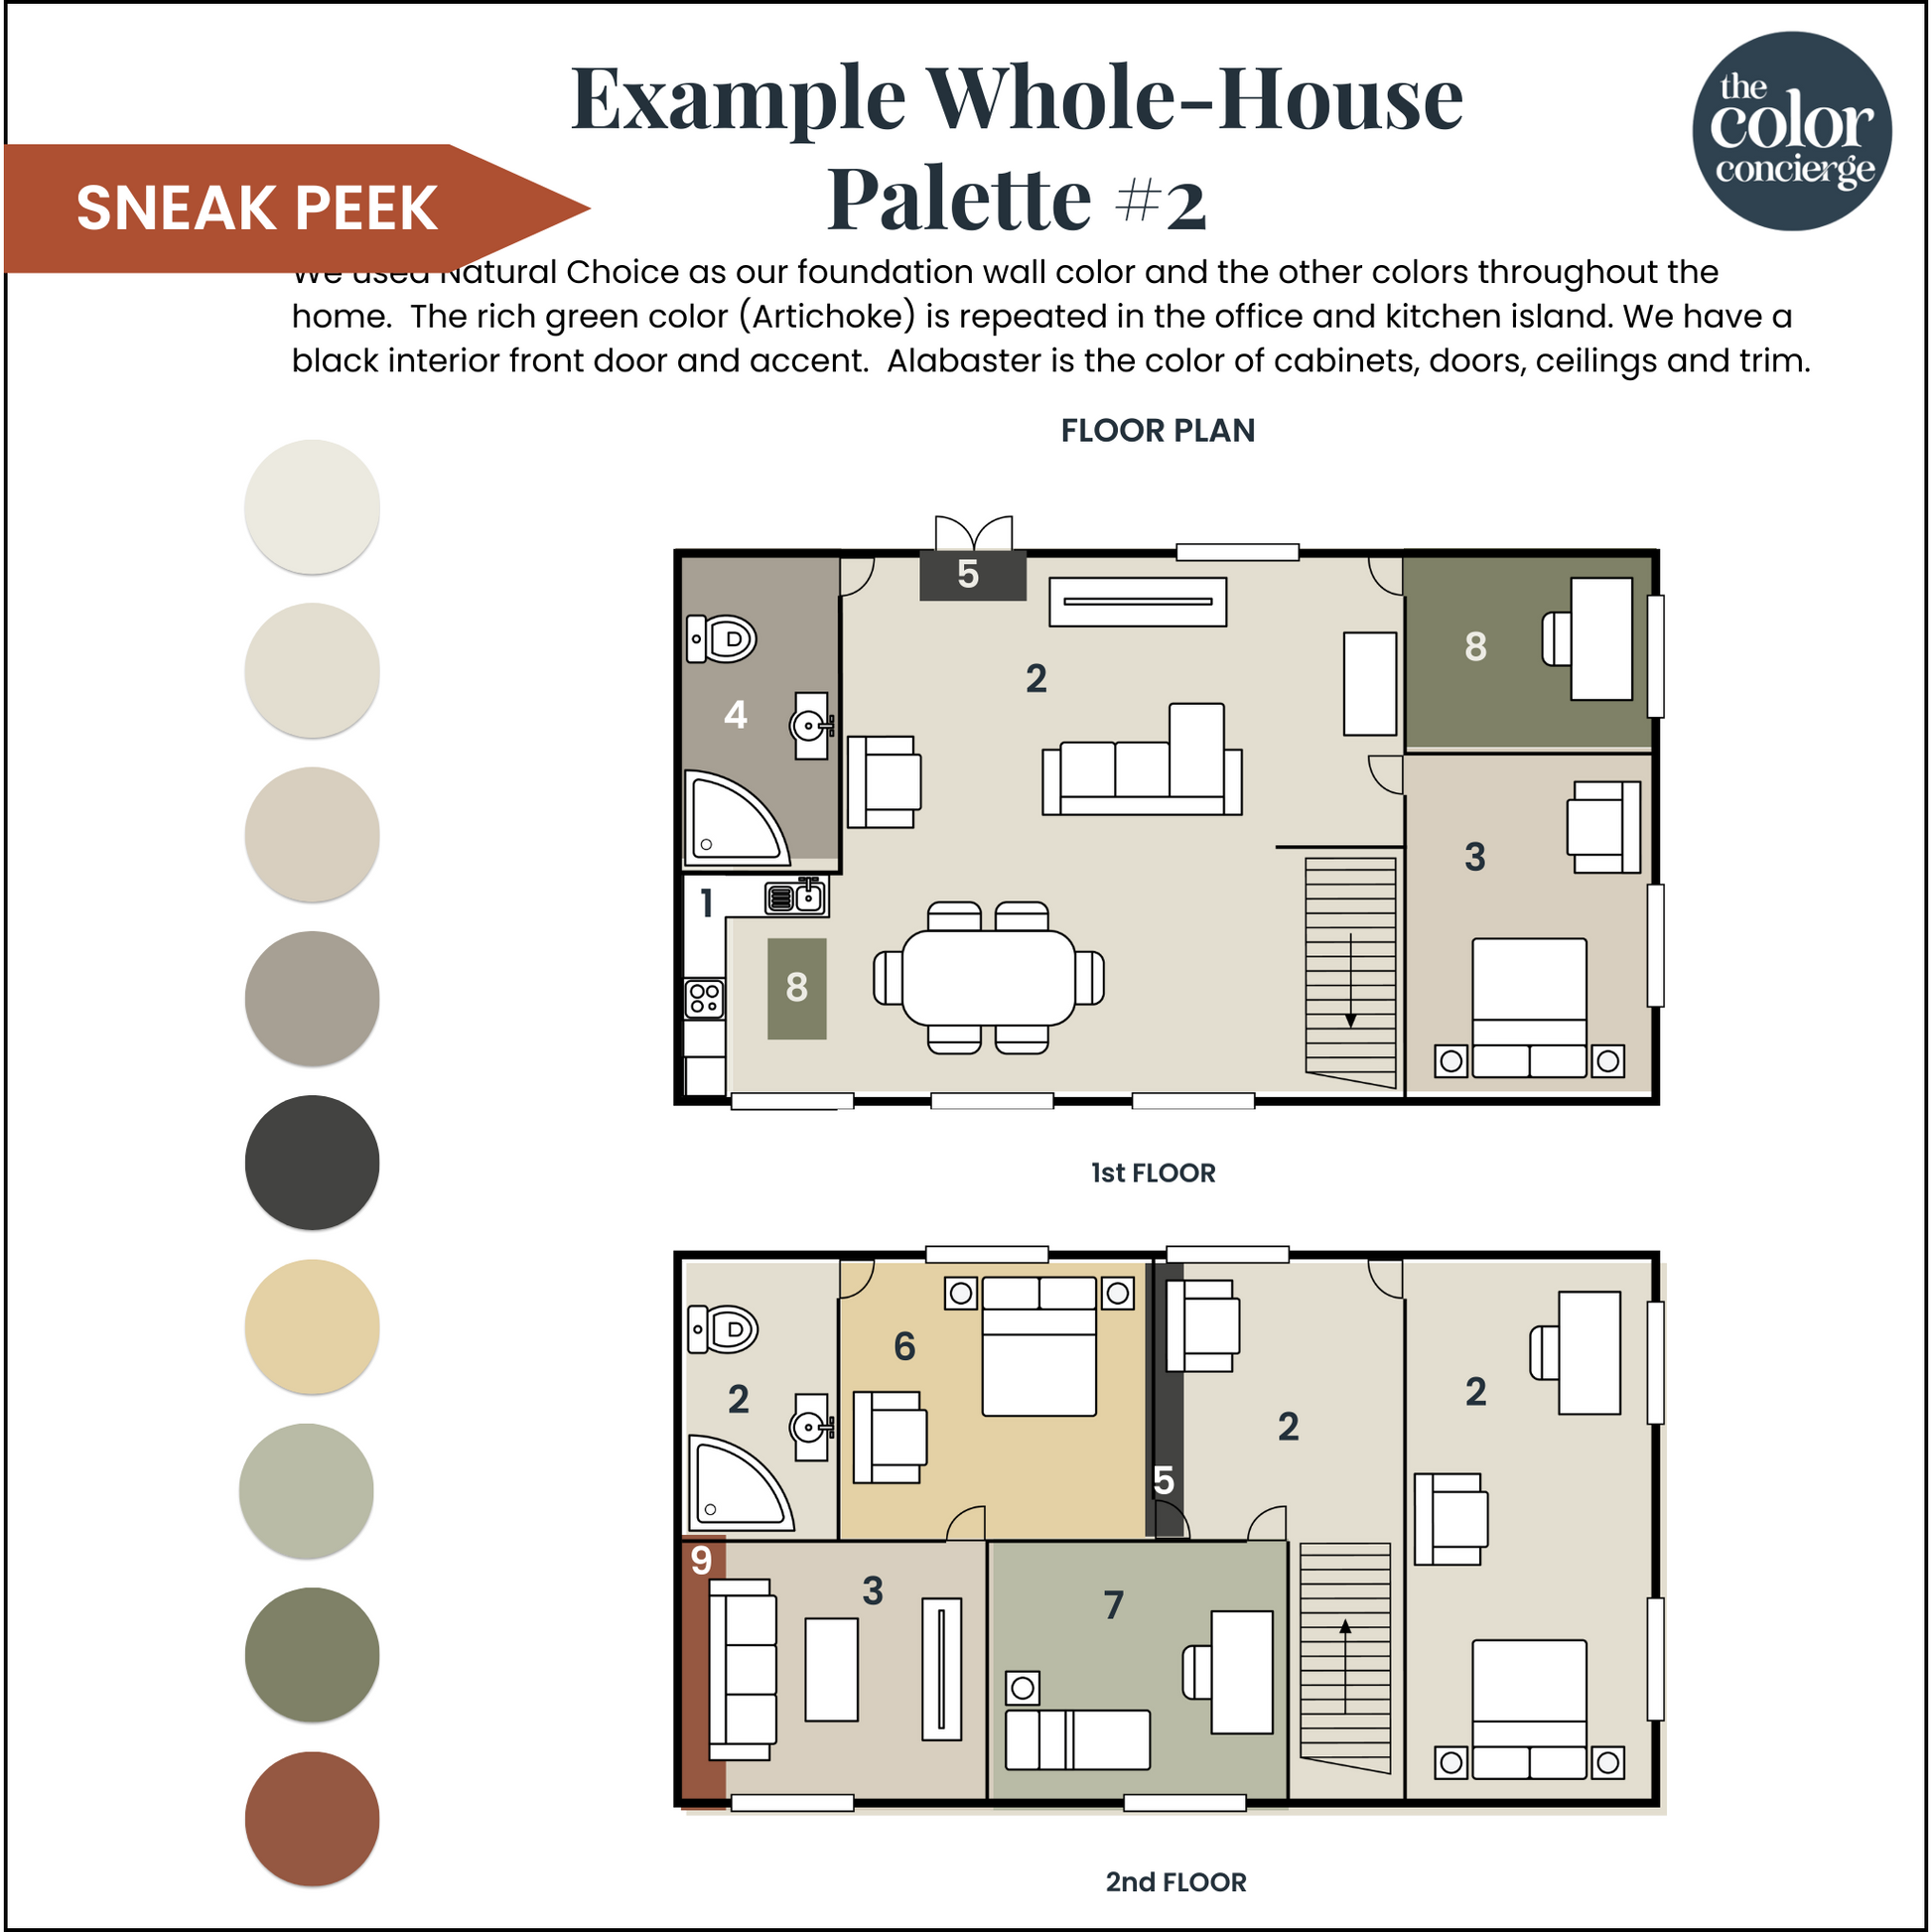 Sherwin-Williams Alabaster whole-house color palette example